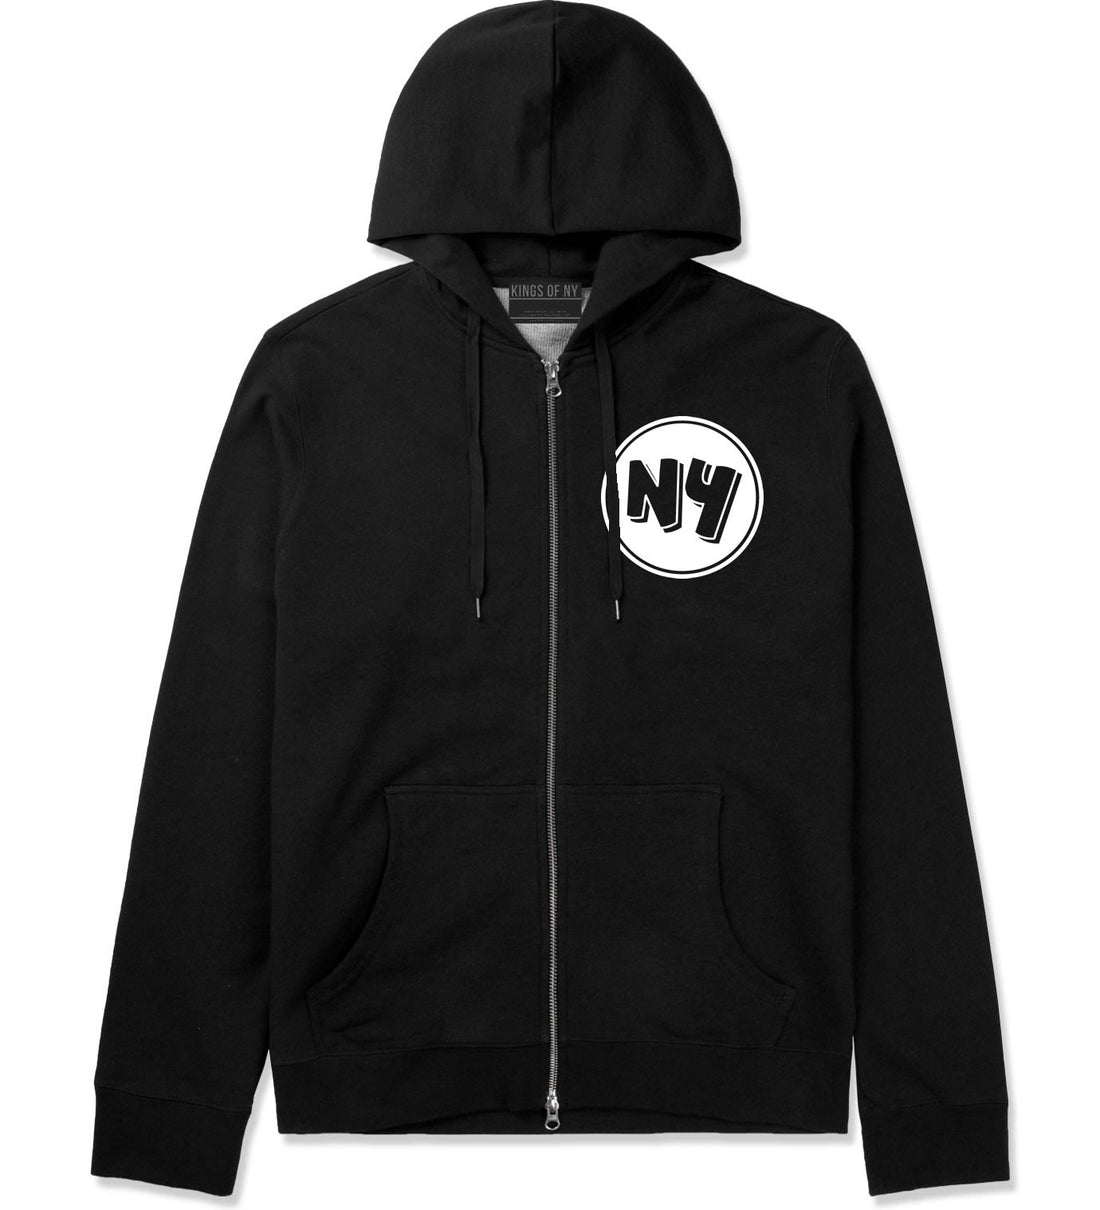 NY Circle Chest Logo Zip Up Hoodie in Black By Kings Of NY